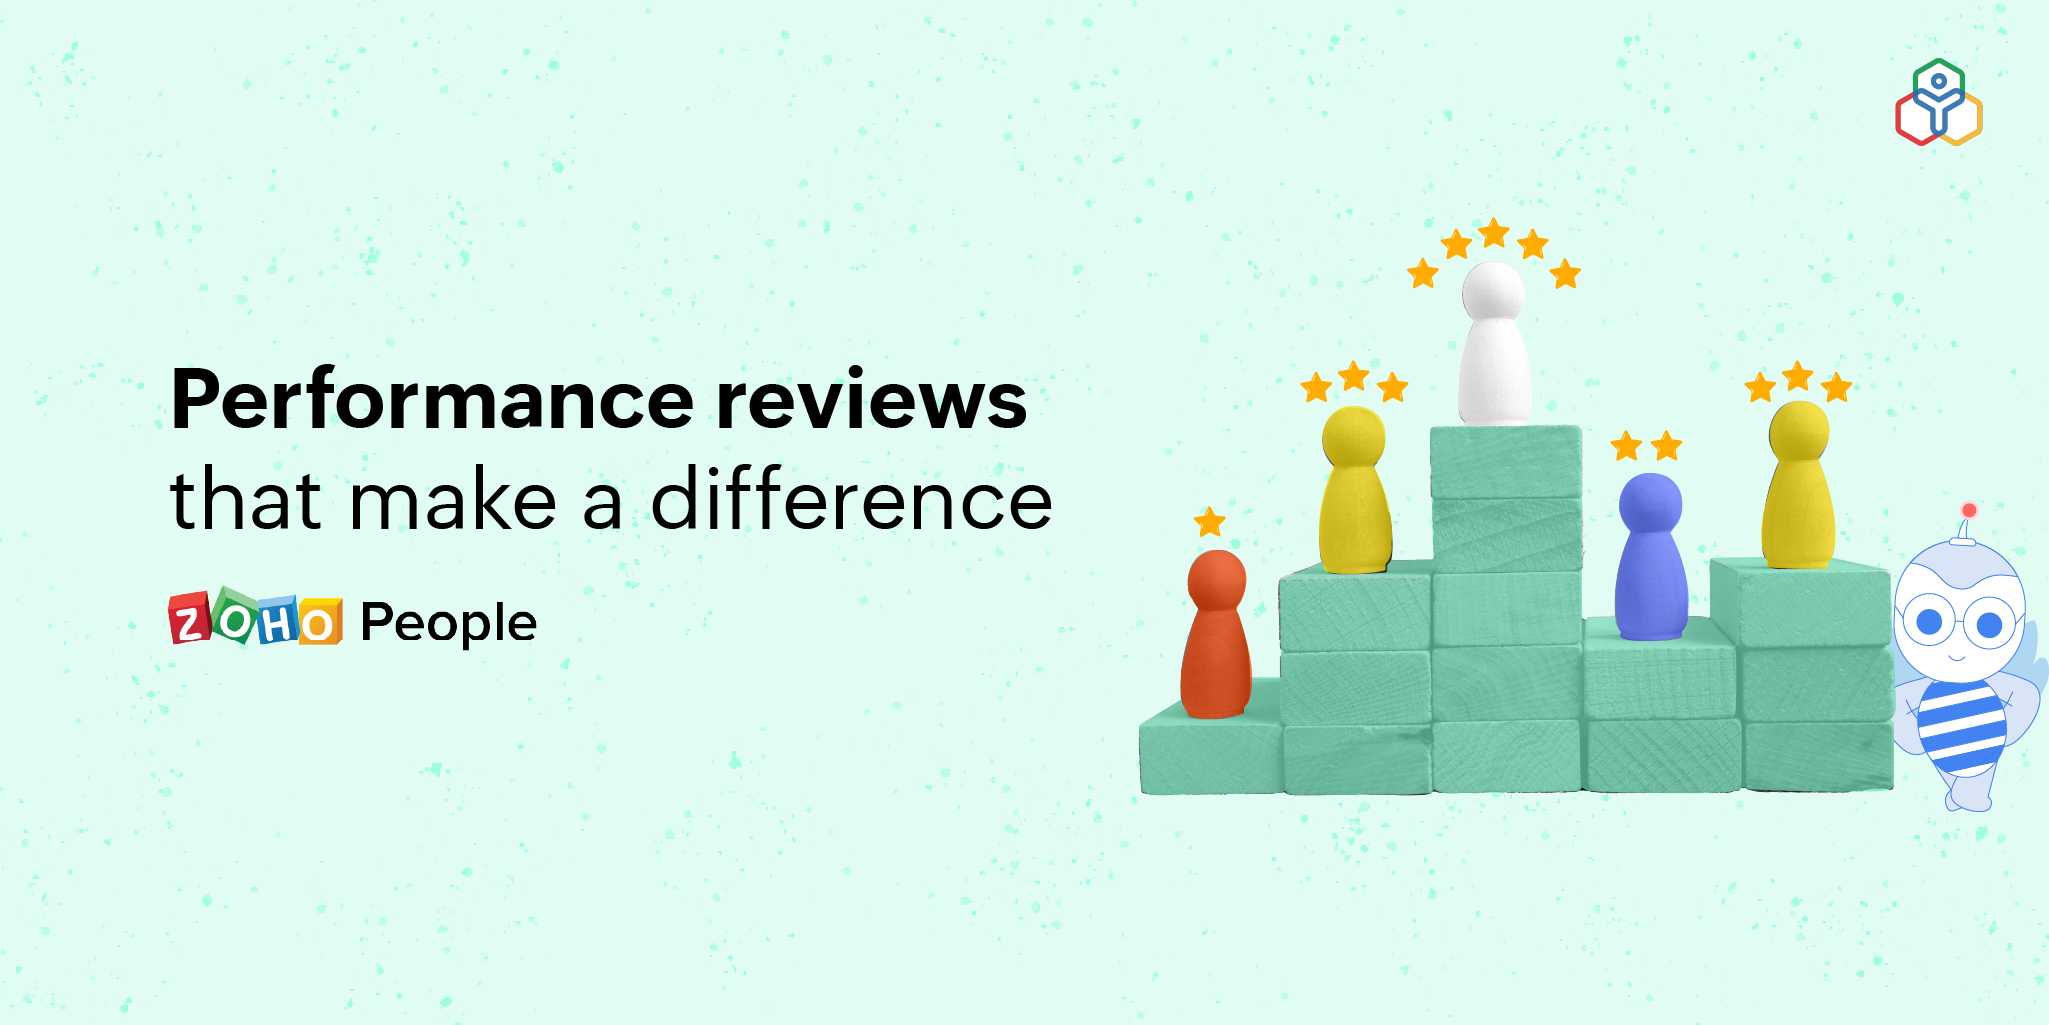 Top 5 tips to get the best out of performance reviews